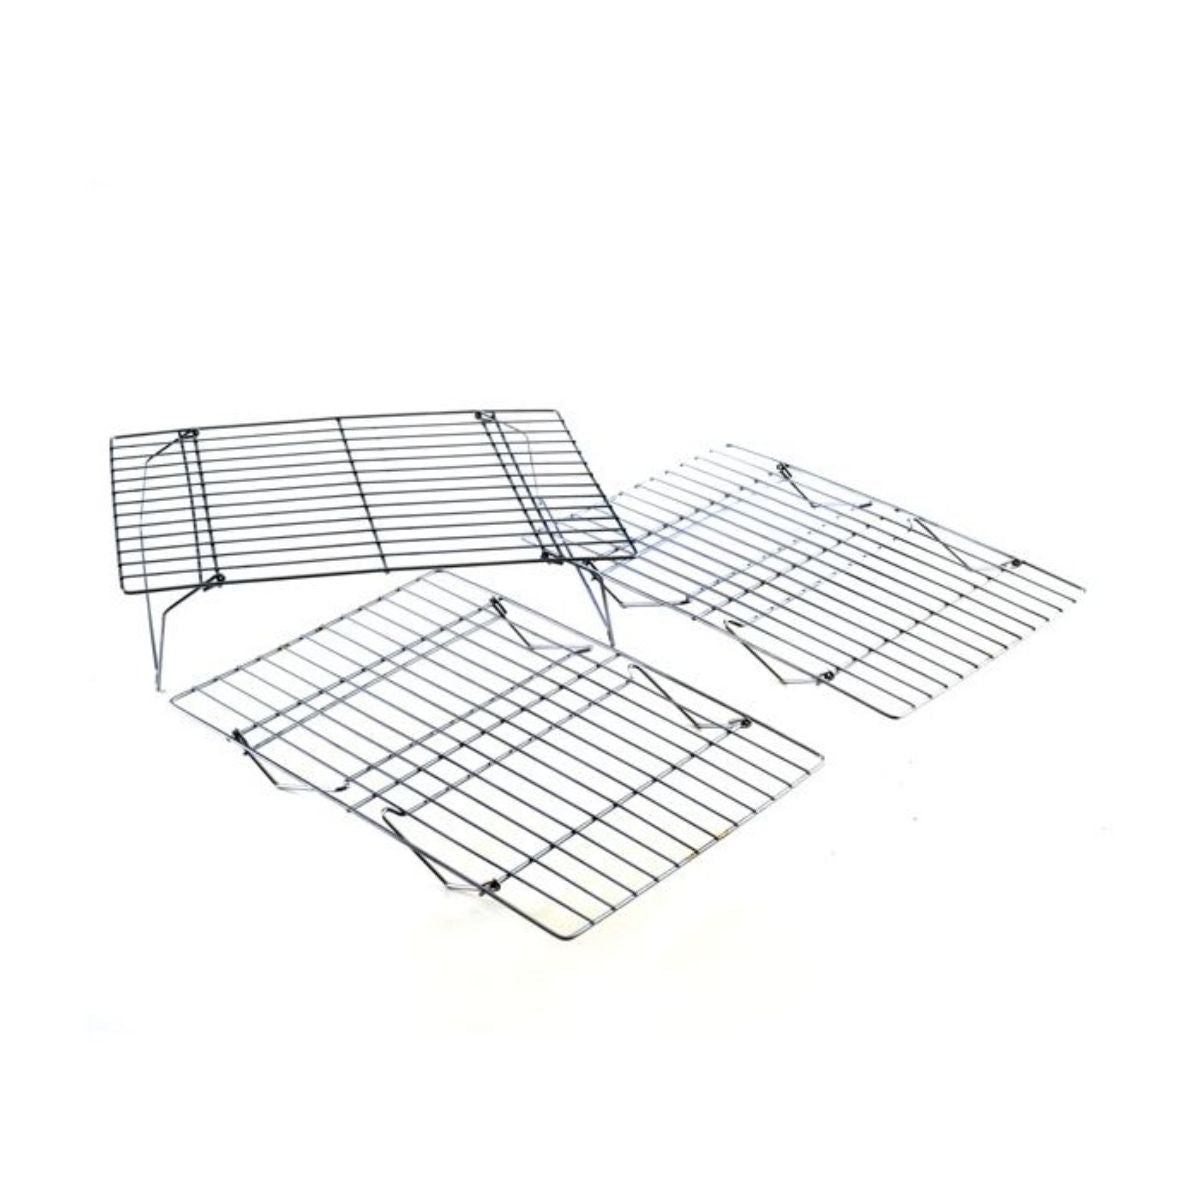 Tiered Cooling Rack